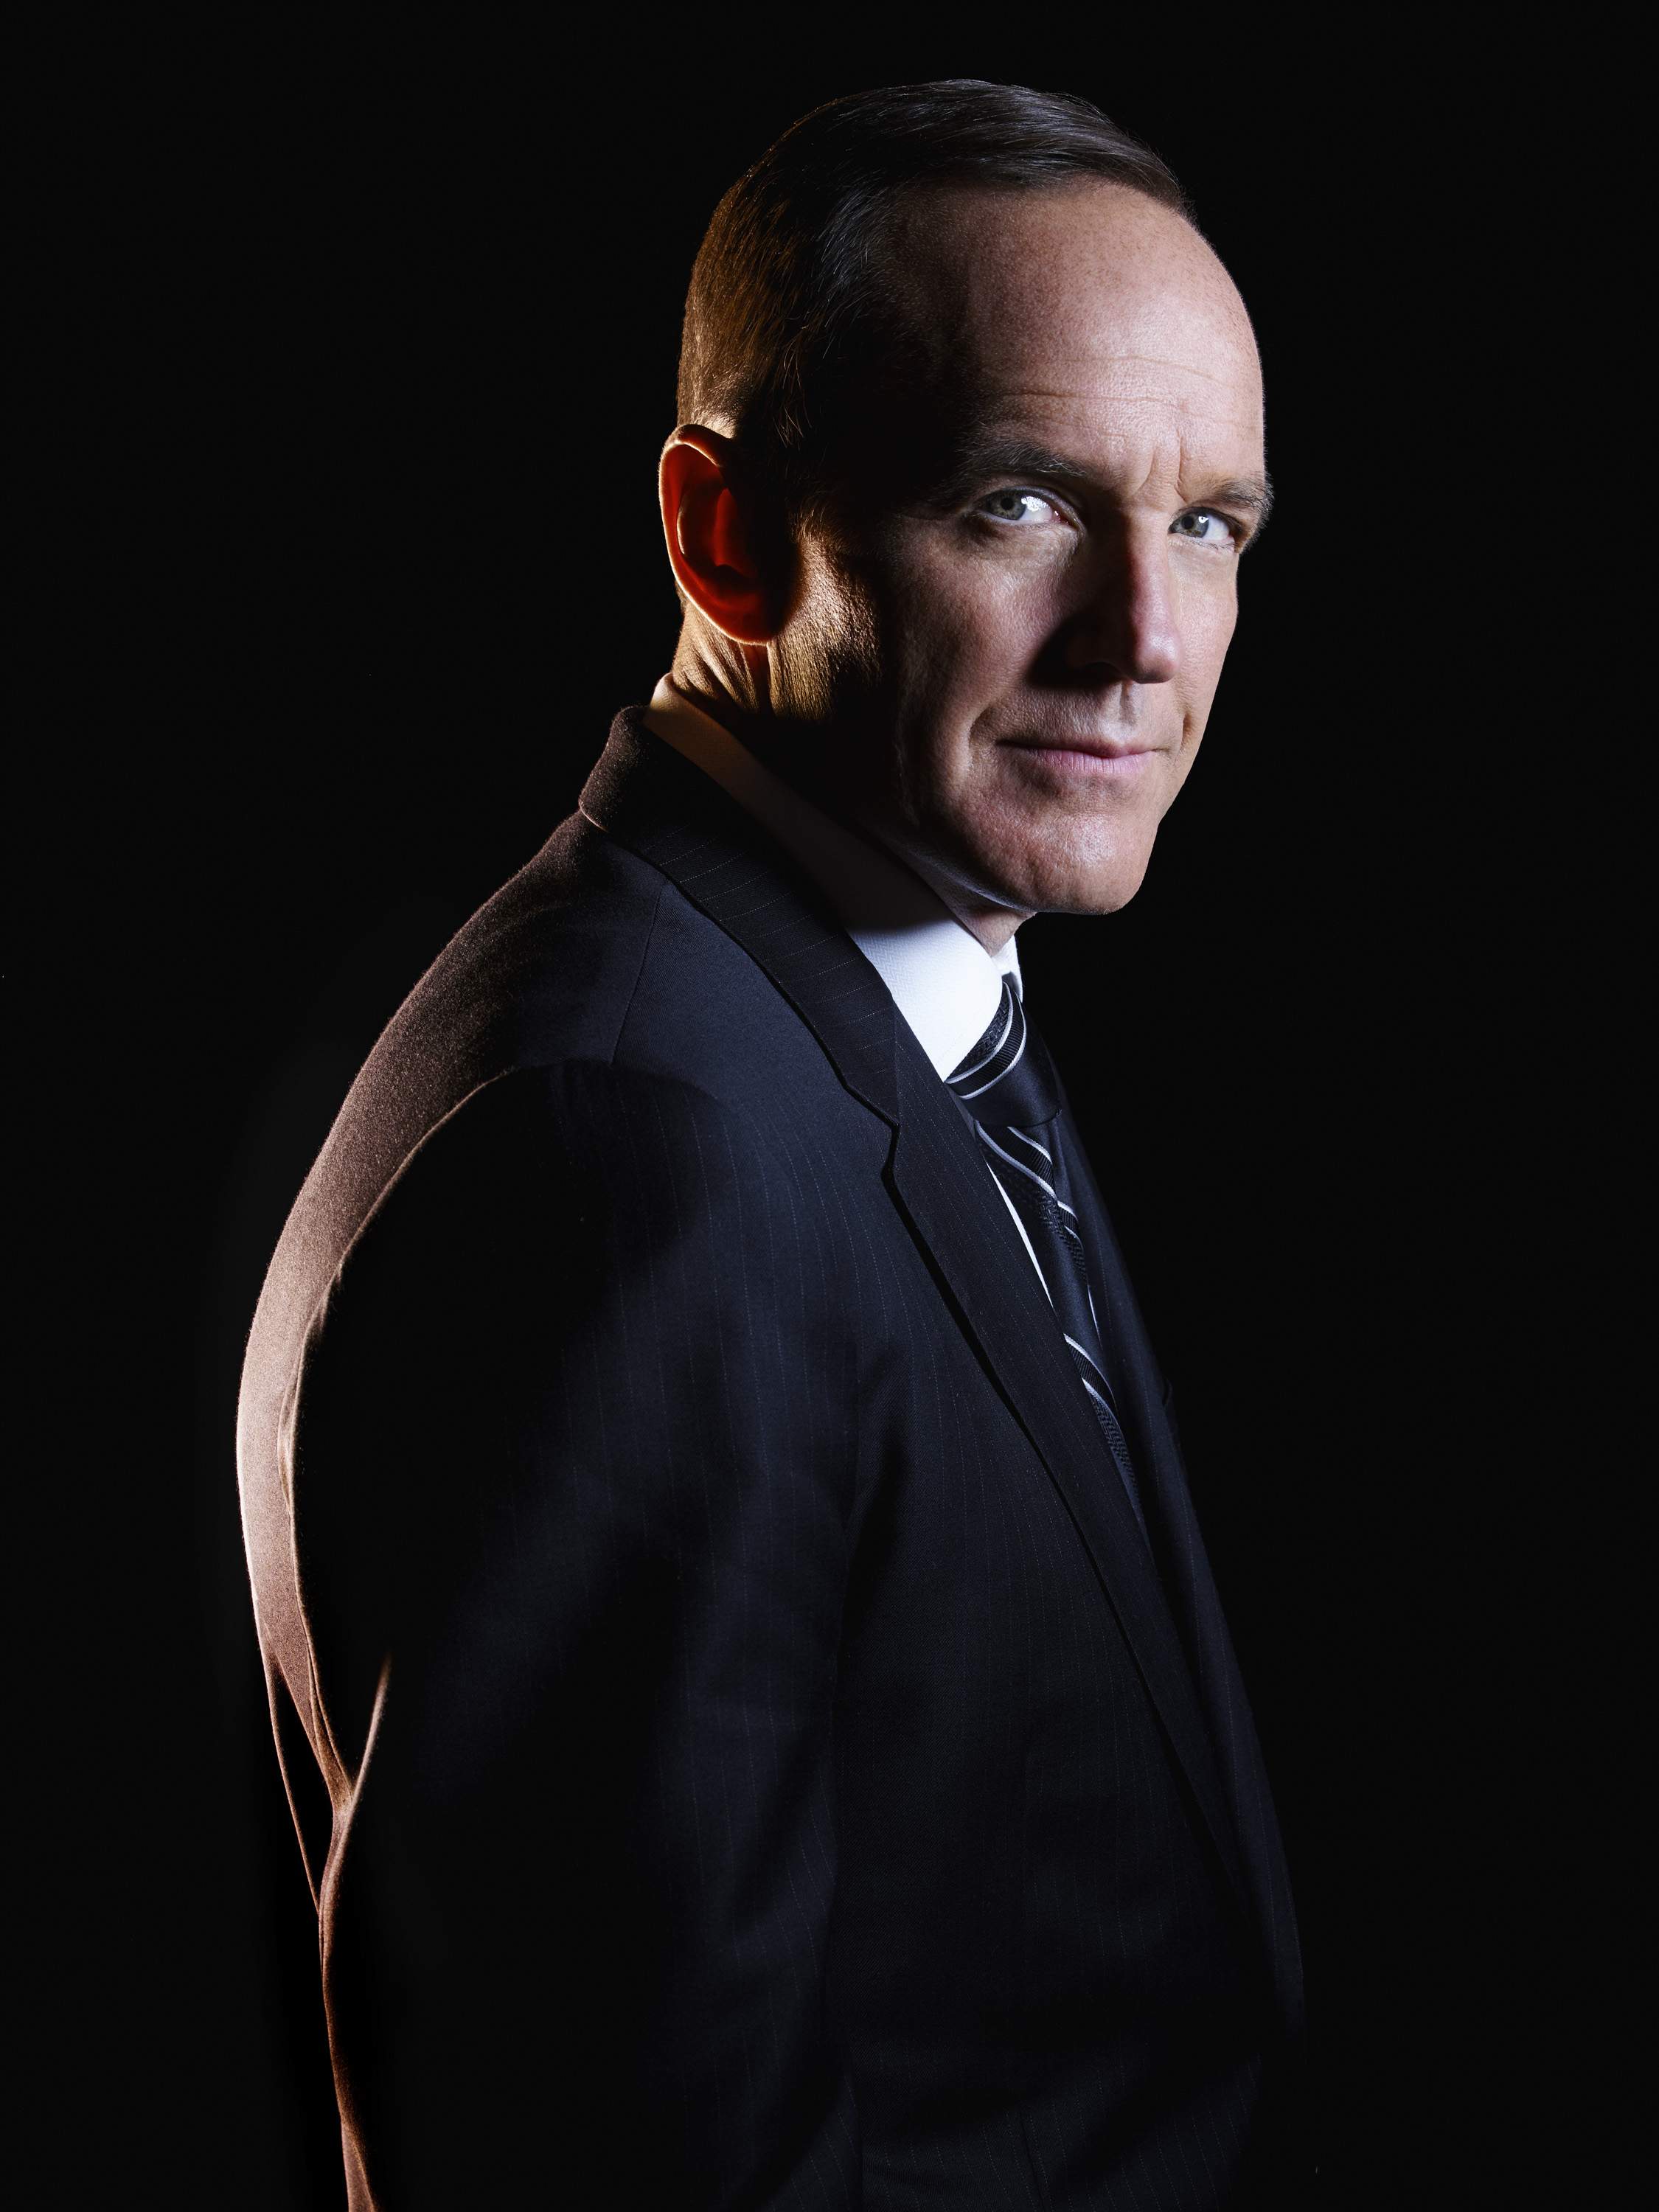 Phil Coulson's Entire Backstory Explained